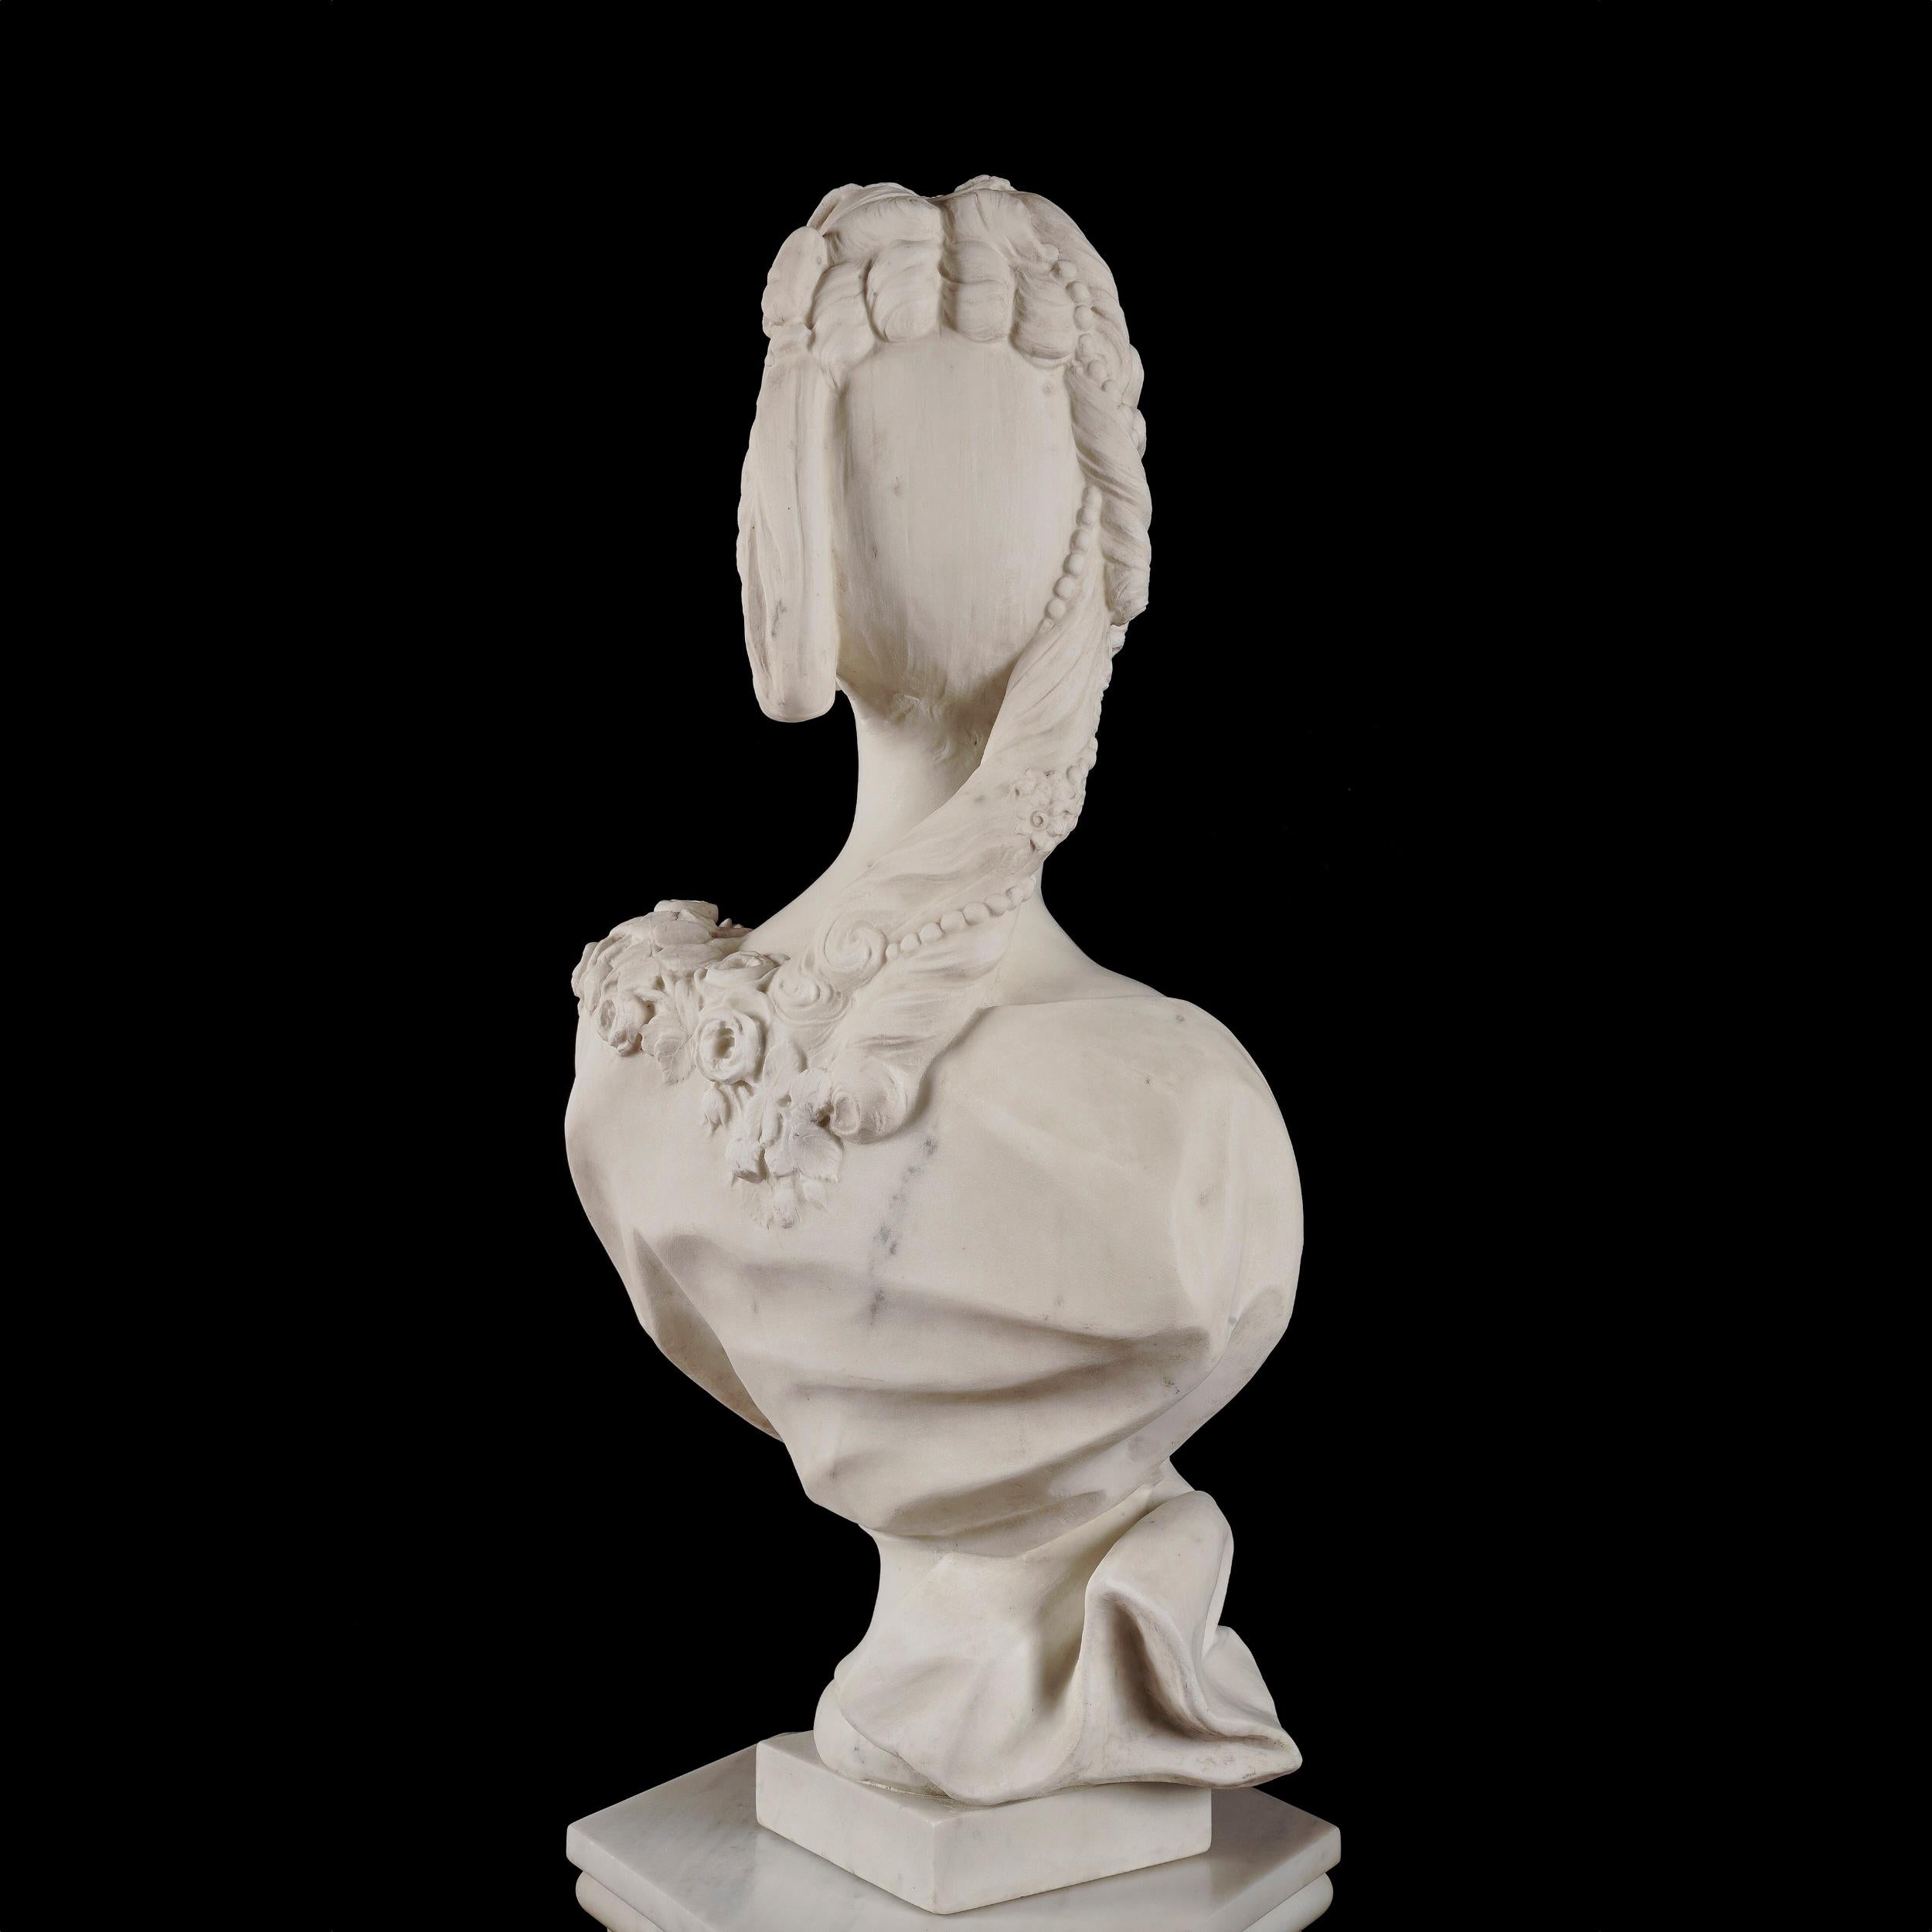 Neoclassical Revival Pair of 19th Century Marble Busts of French Royal Figures on Marble Pedestals For Sale